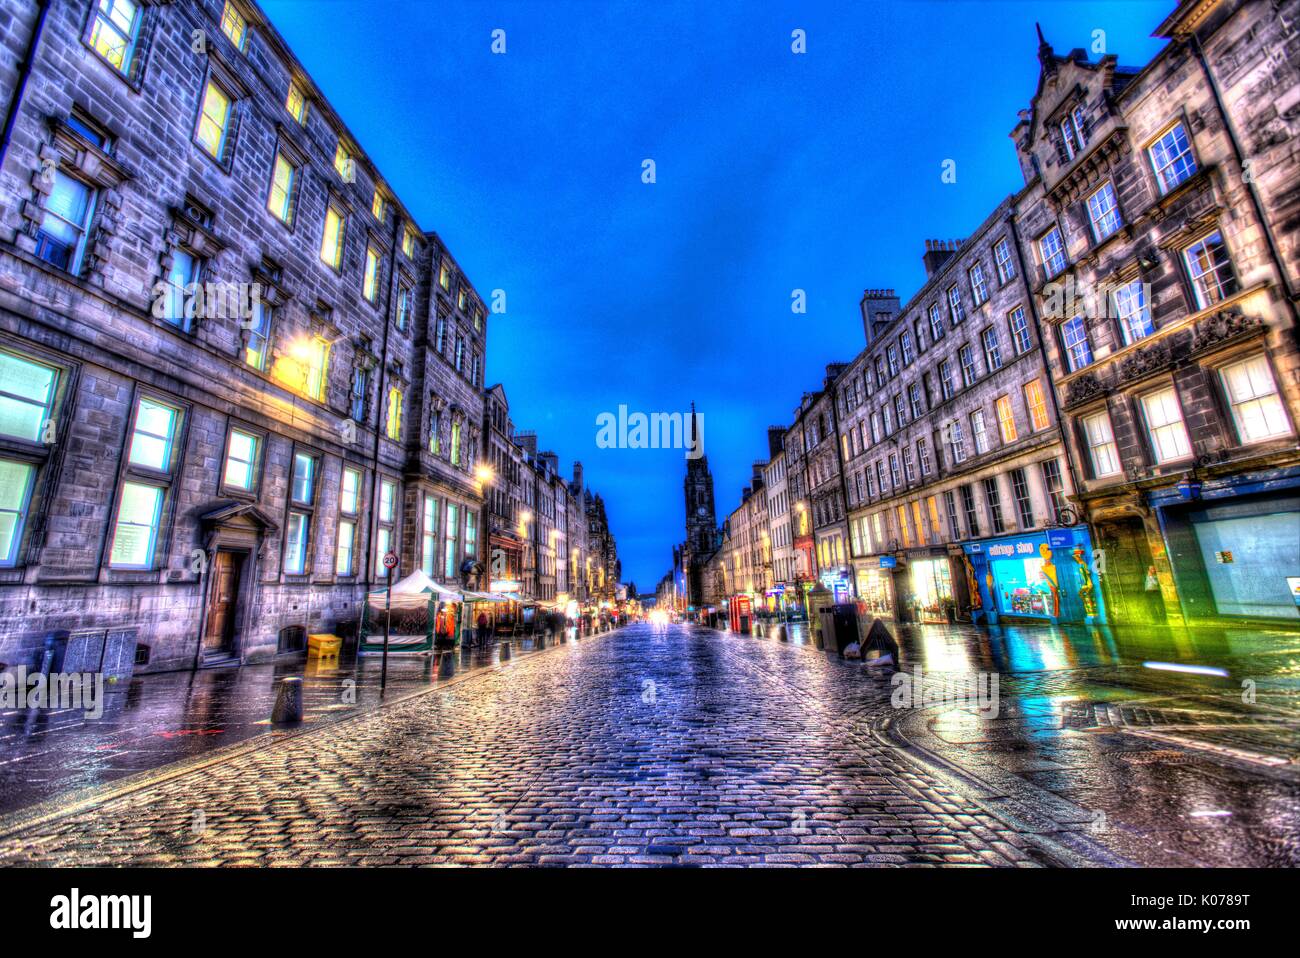 City of Edinburgh, Scotland. Picturesque night view of the Royal Mile. Stock Photo